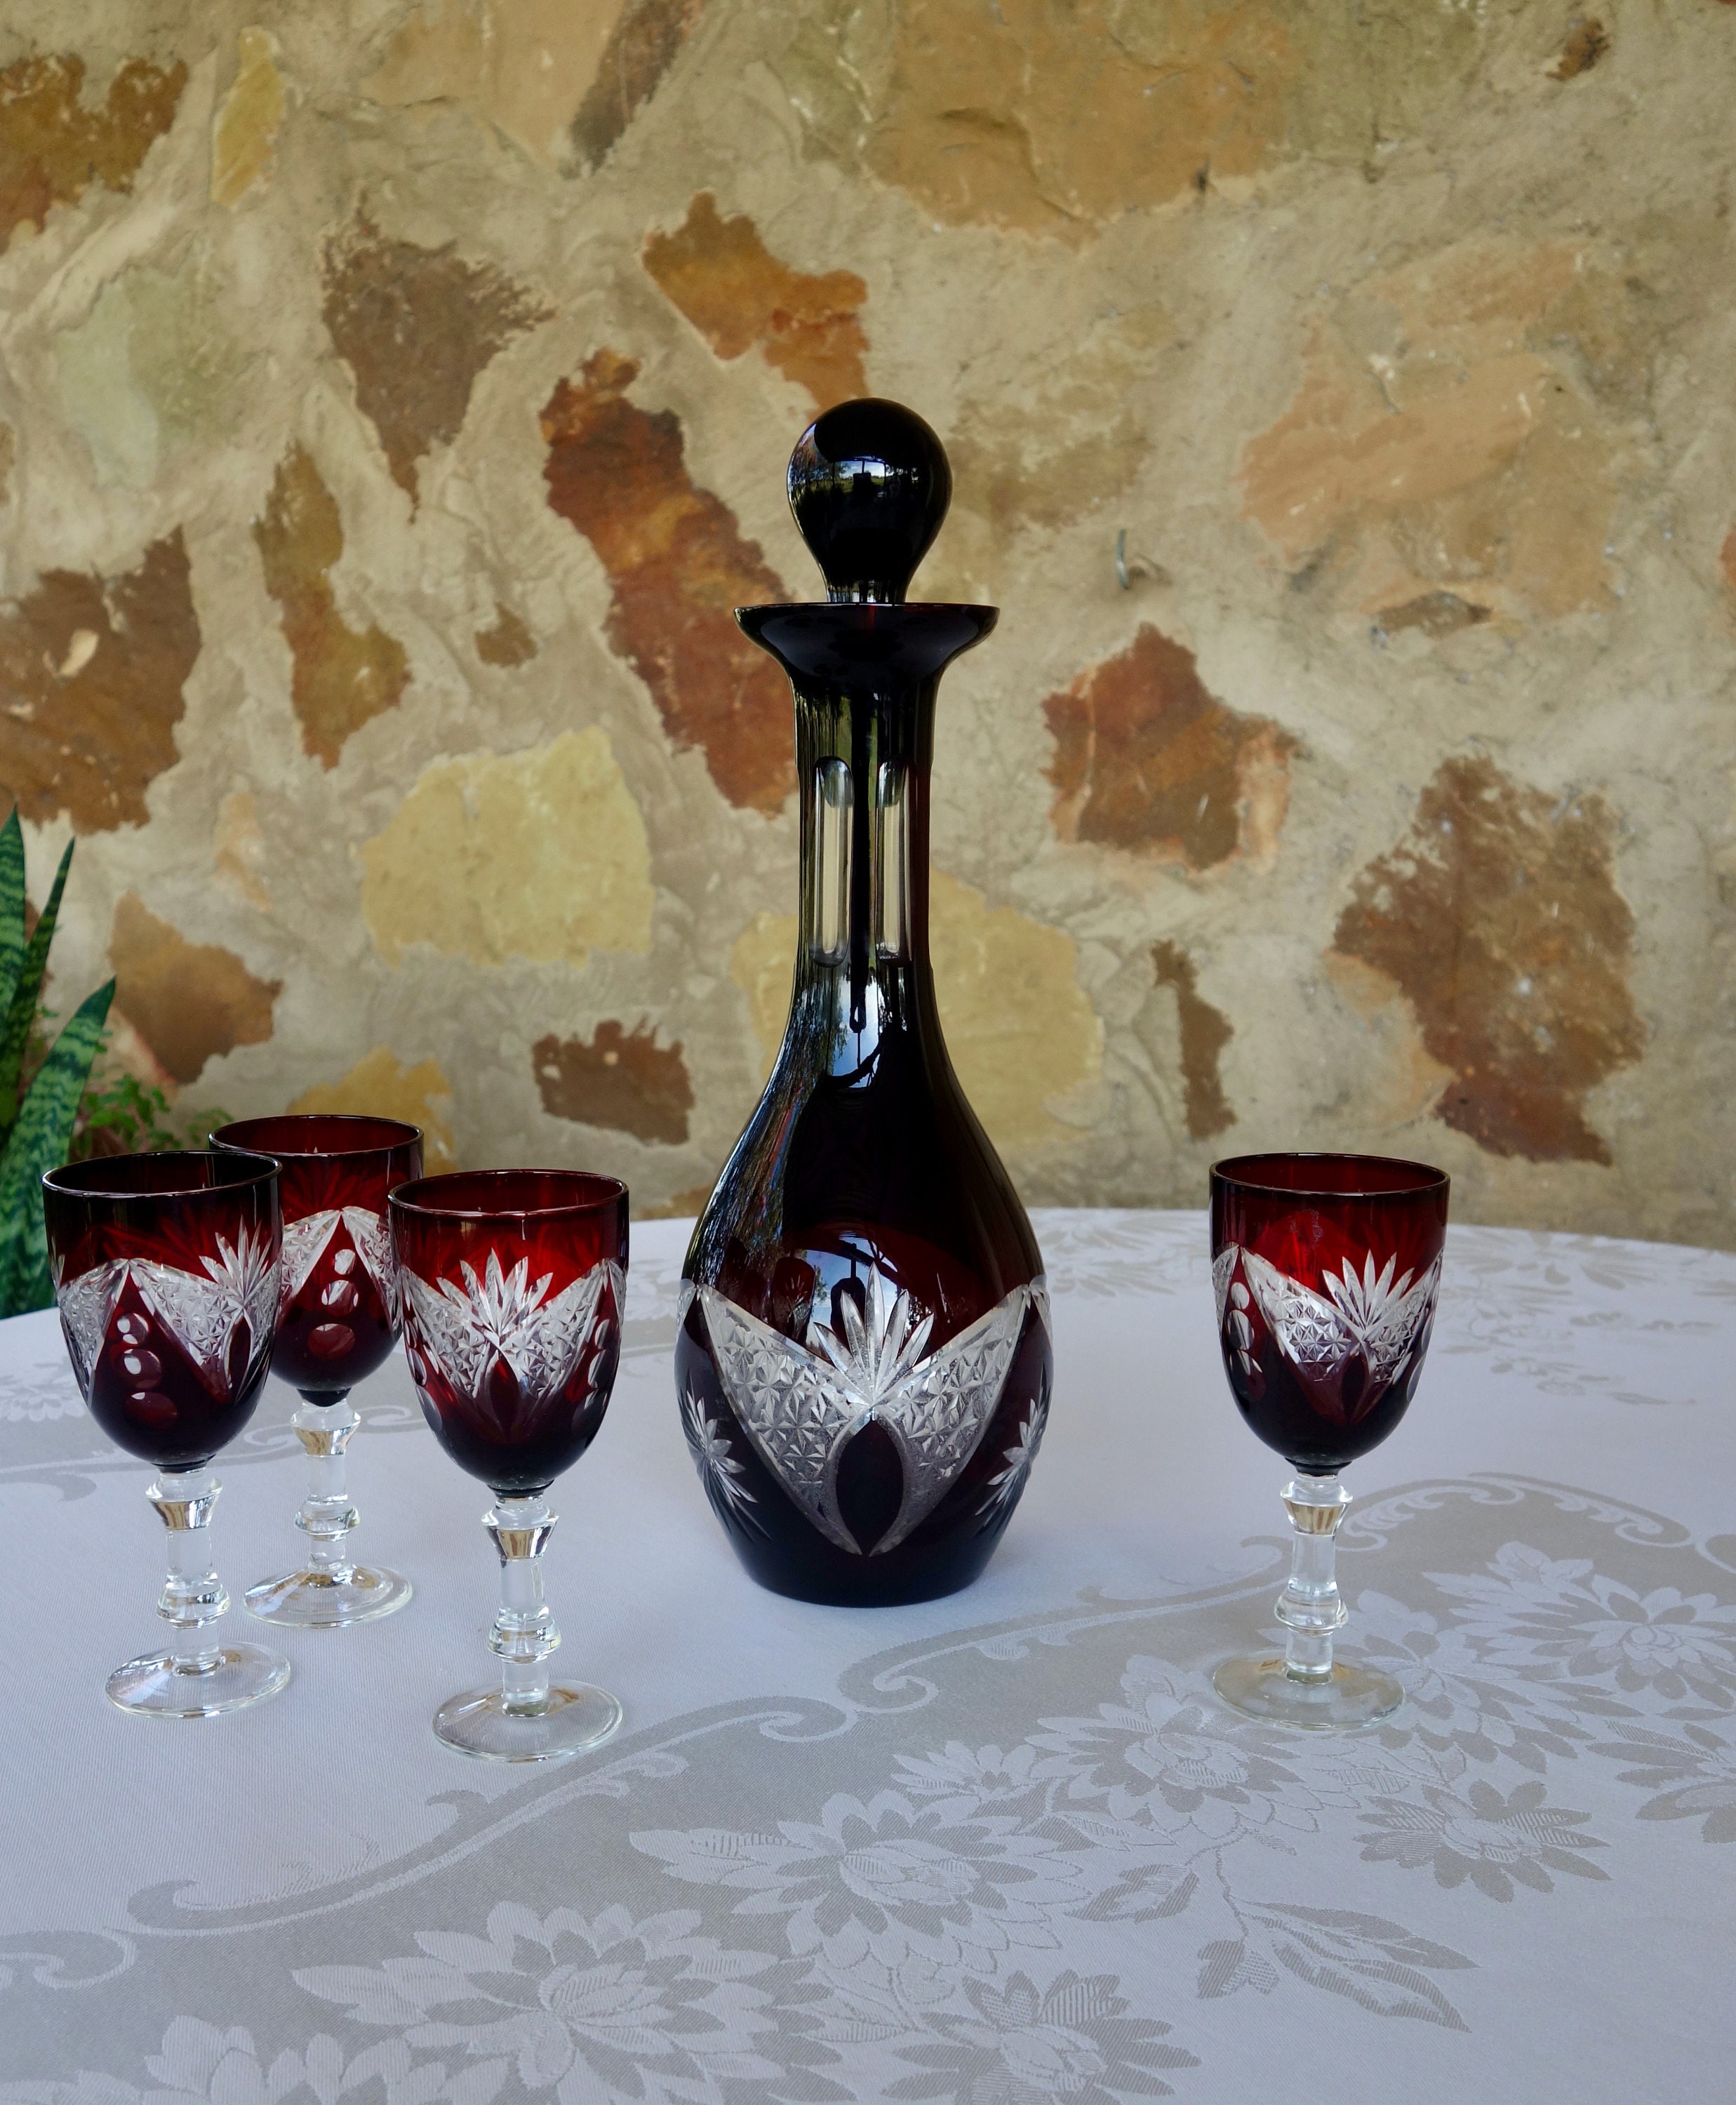 Bohemian Glass Decanter & 6 Matching Wine Glasses Red Cut back to